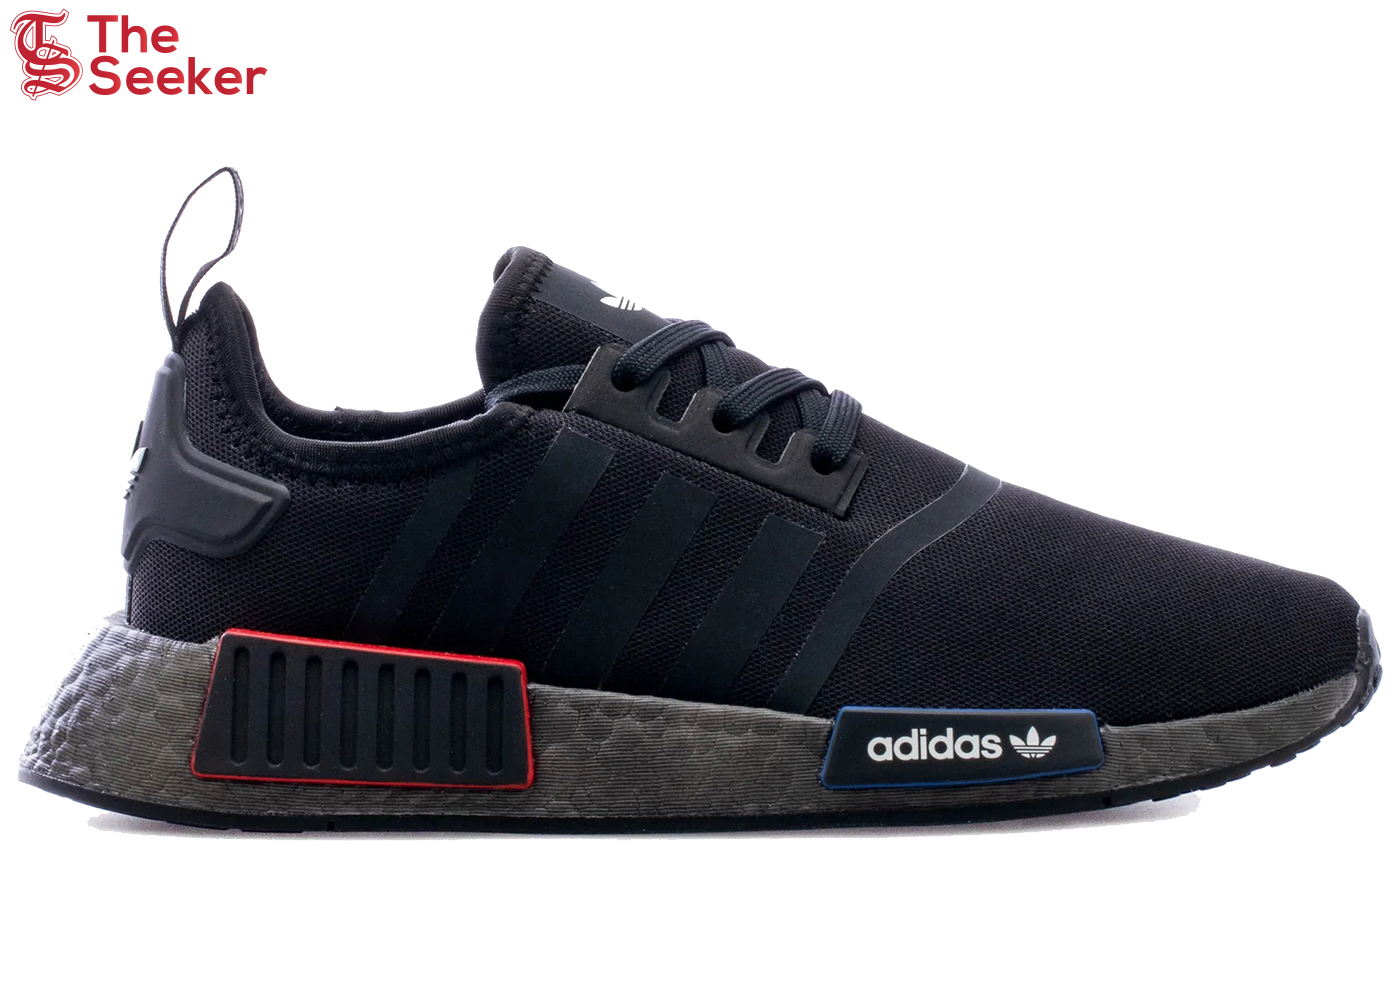 adidas NMD R1 Refined Core Black (GS)